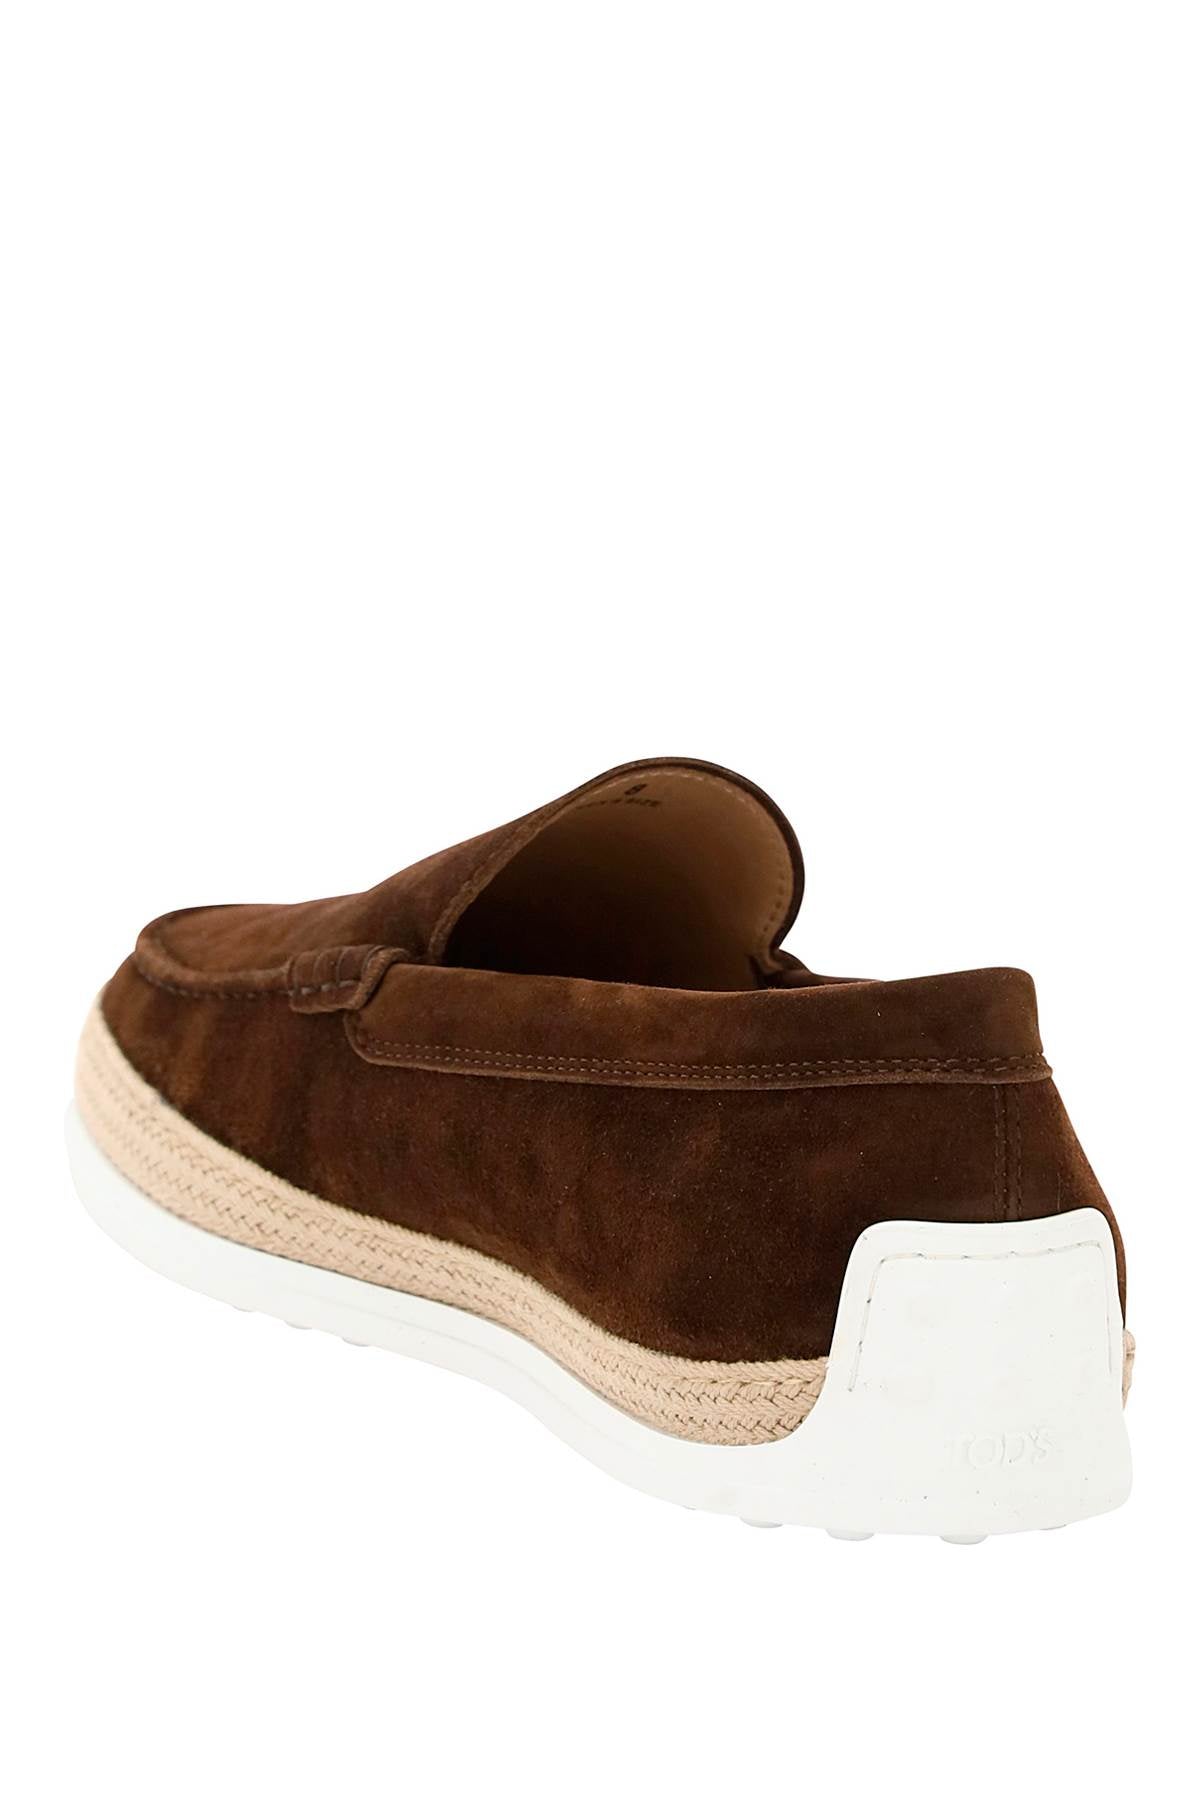 Tod's suede slip-on with rafia insert-2